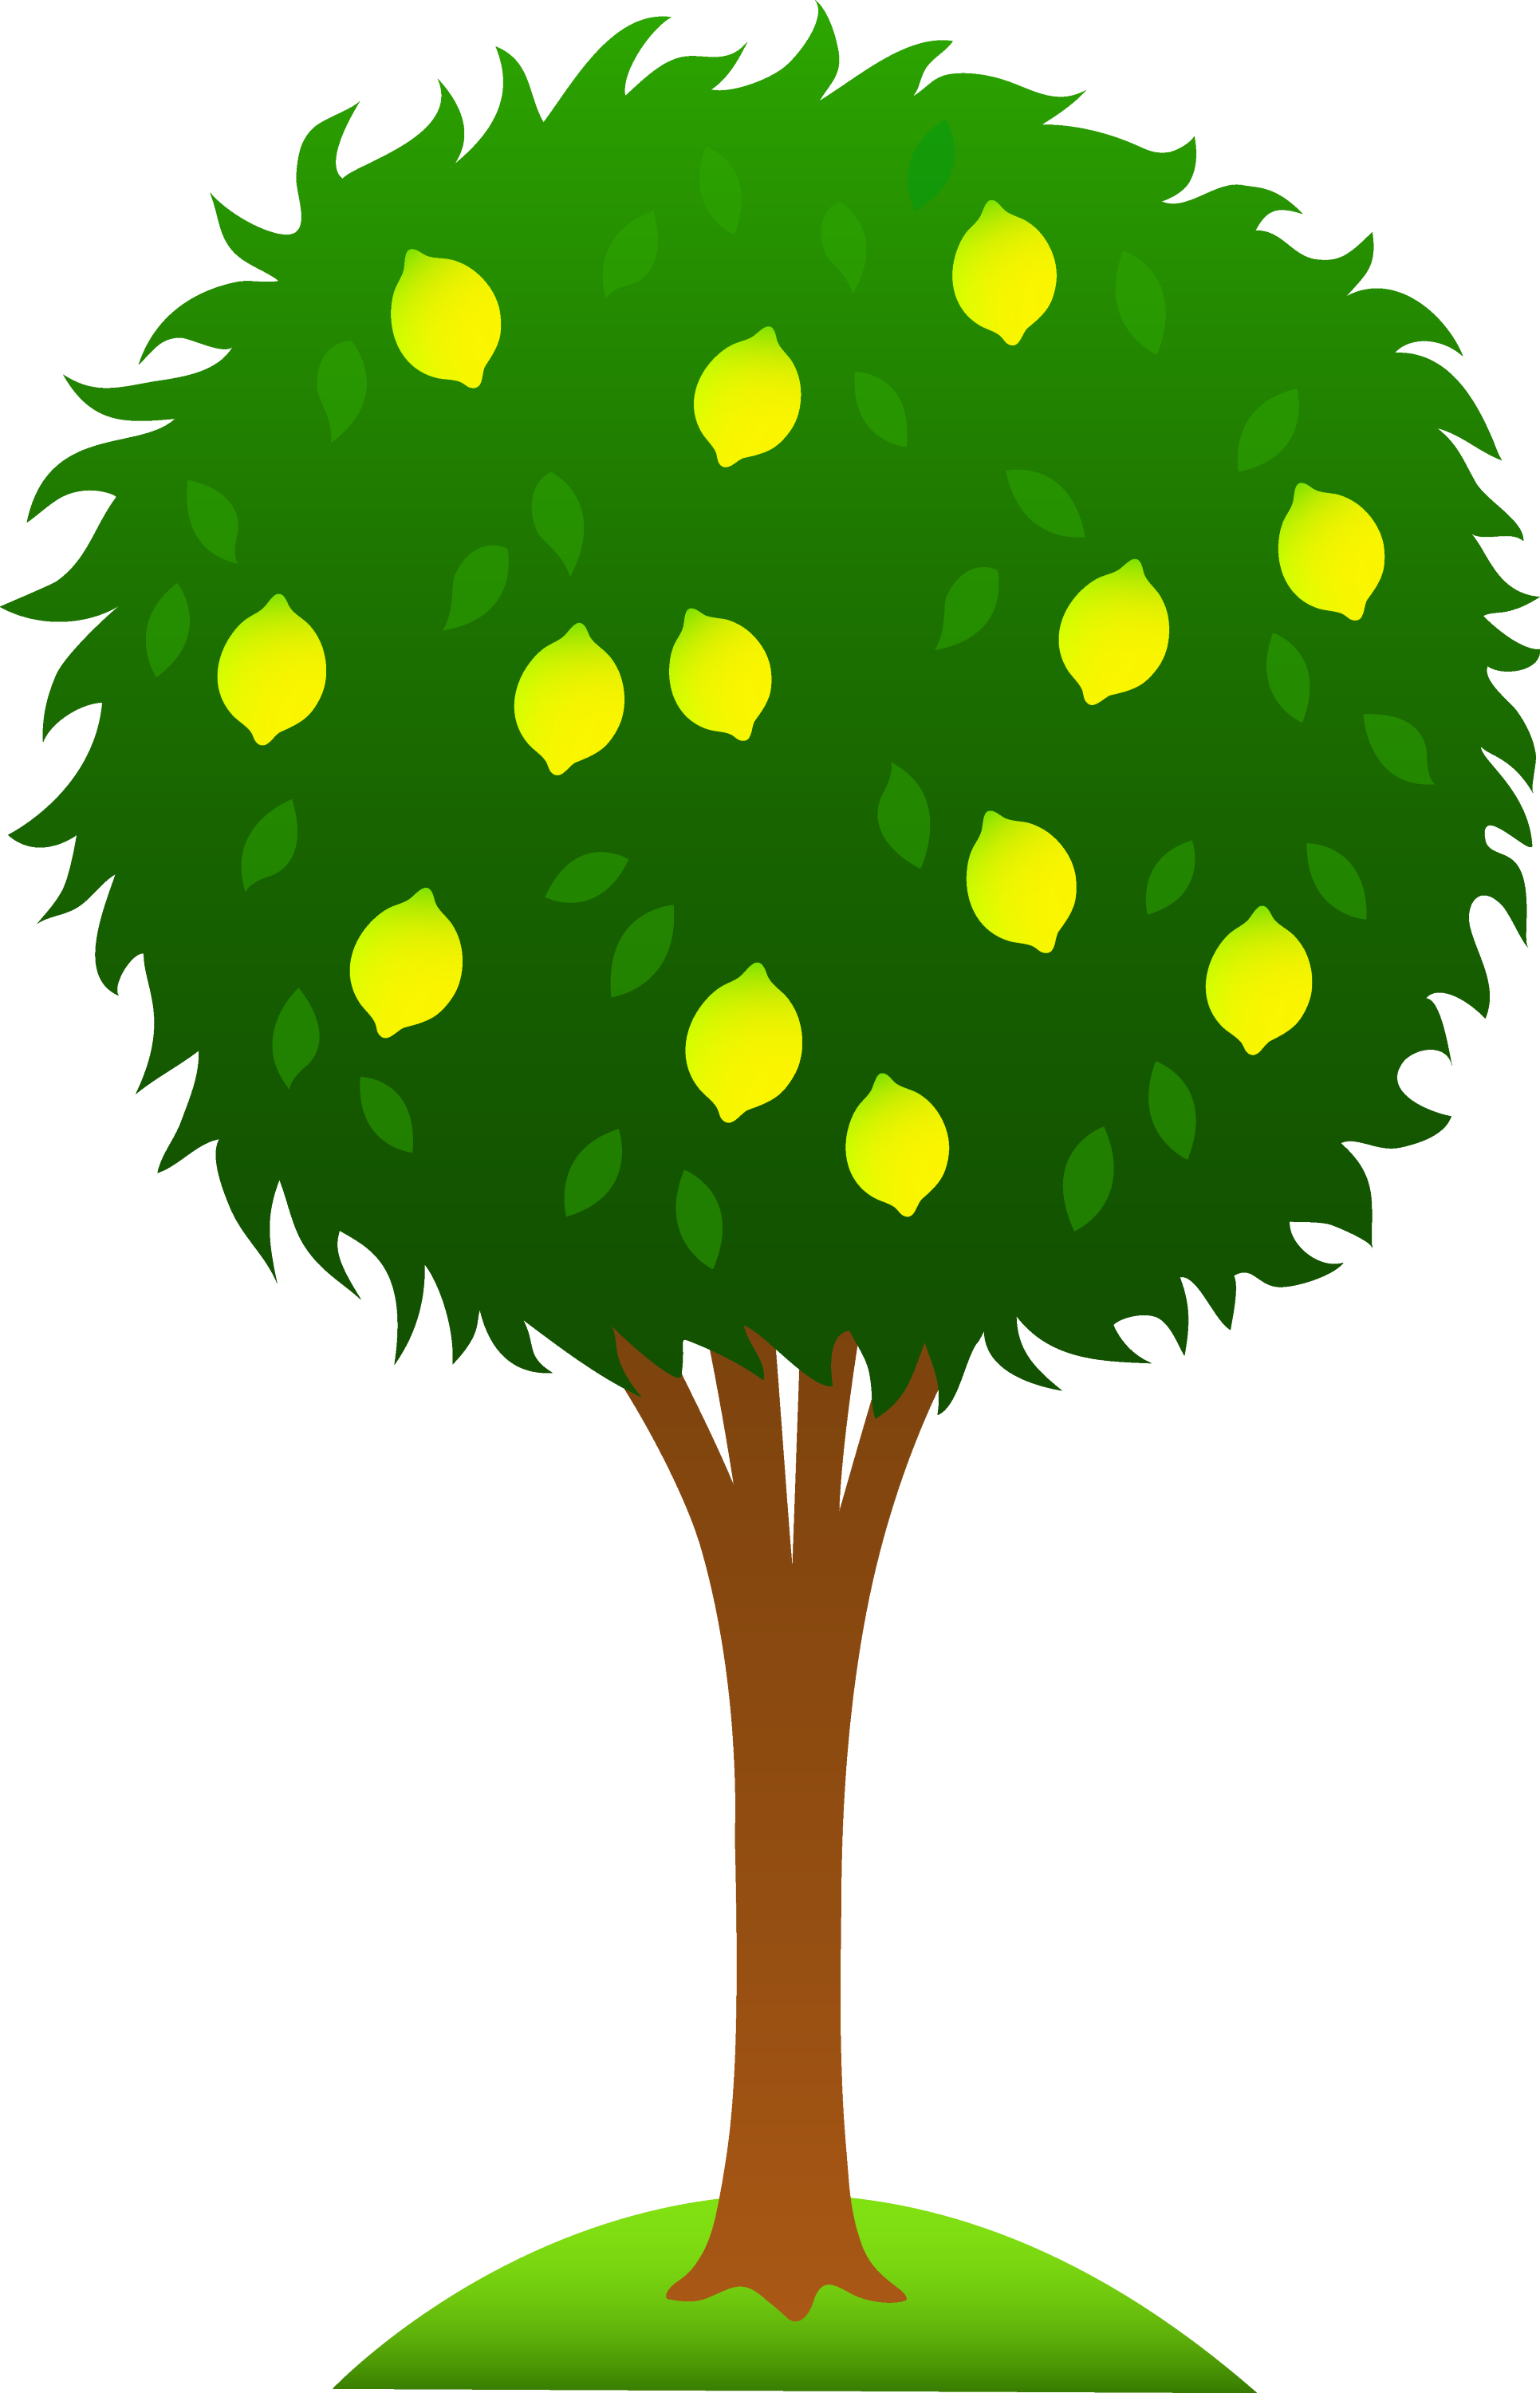 free clipart images trees - photo #38